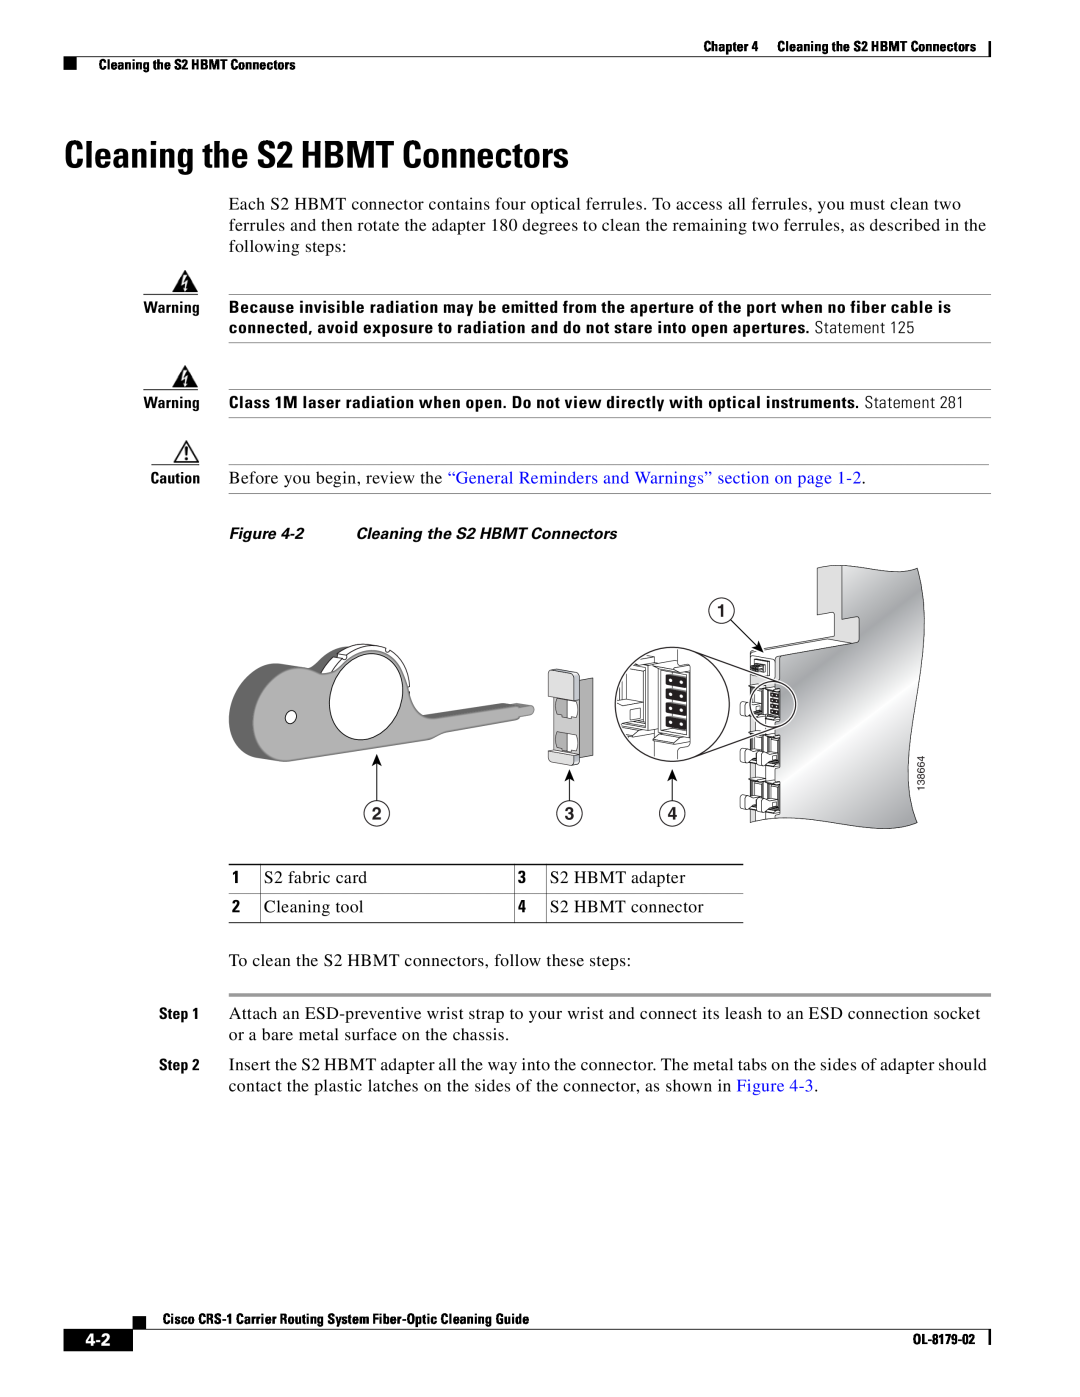 Cisco Systems CRS-1 manual Cleaning the S2 HBMT Connectors 